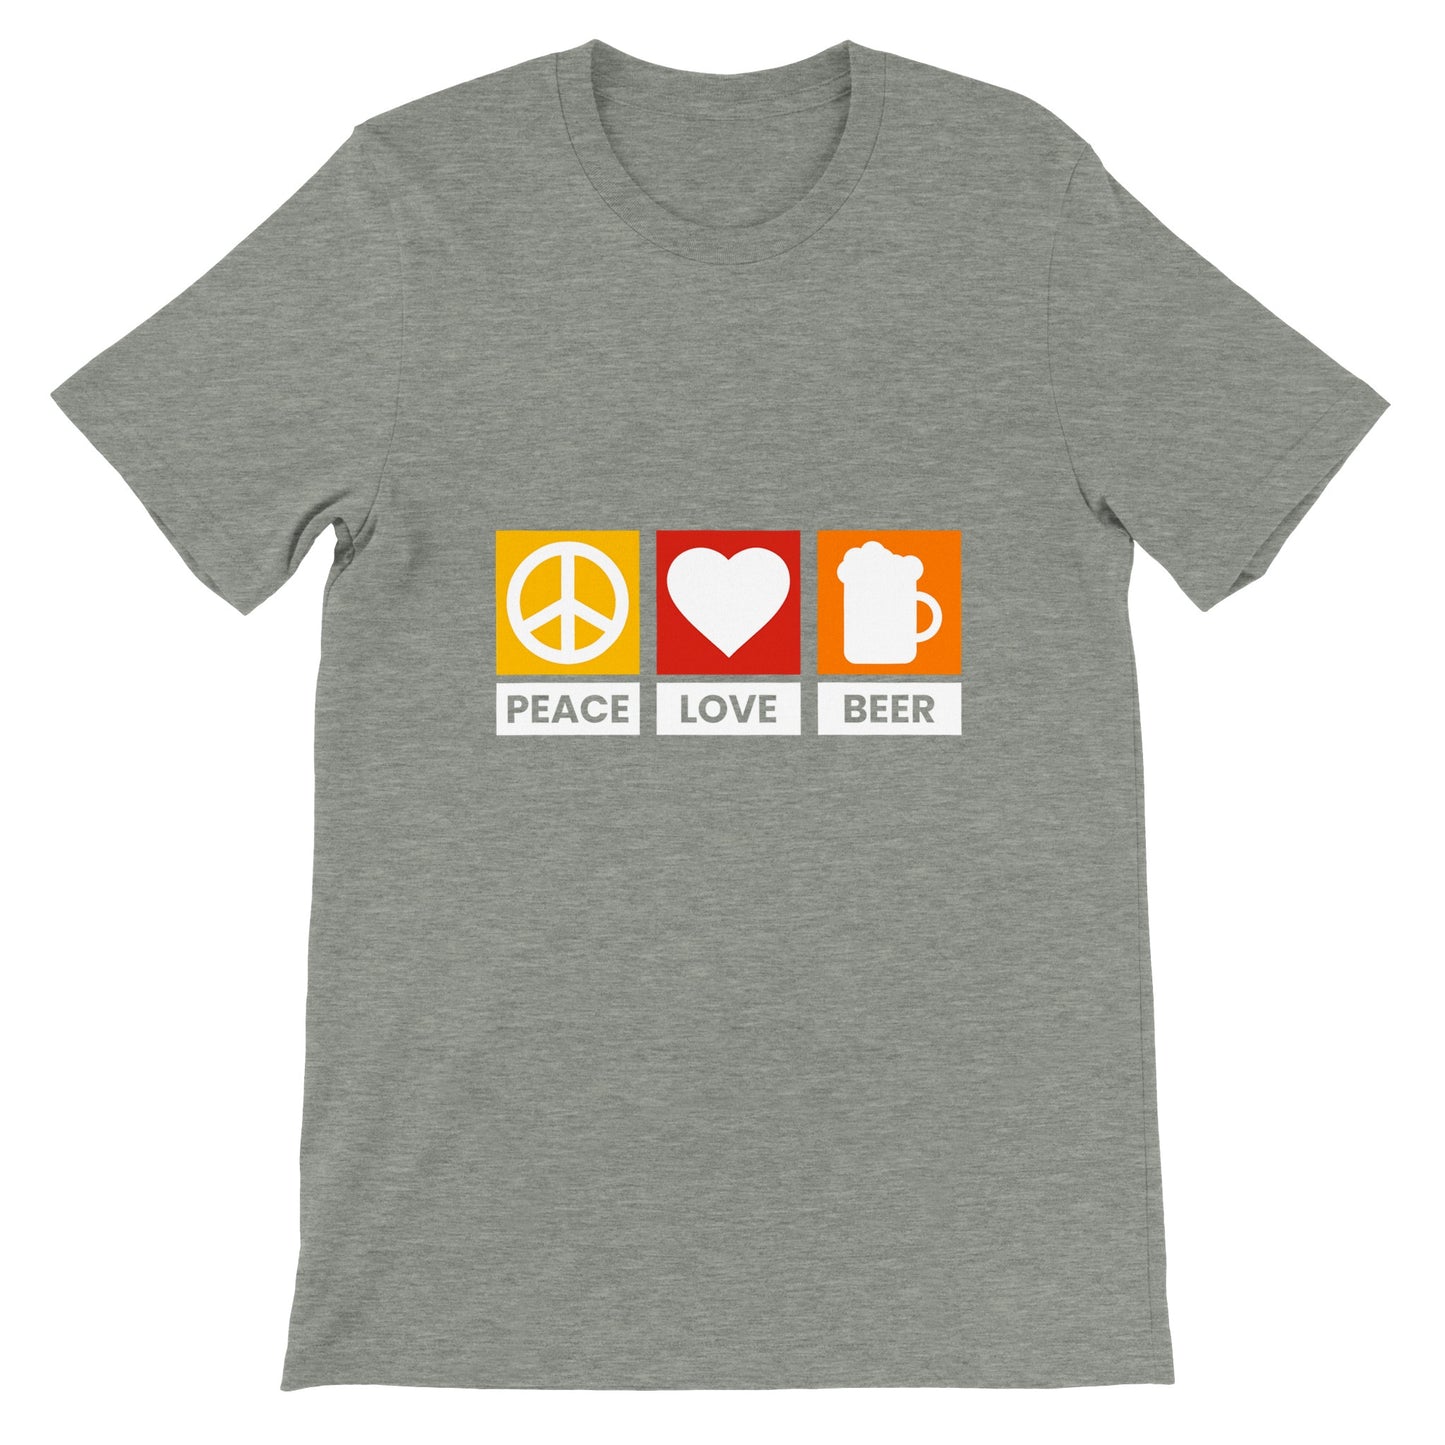 Funny T-shirts - Peace Love Beer - Premium Unisex T-shirt 